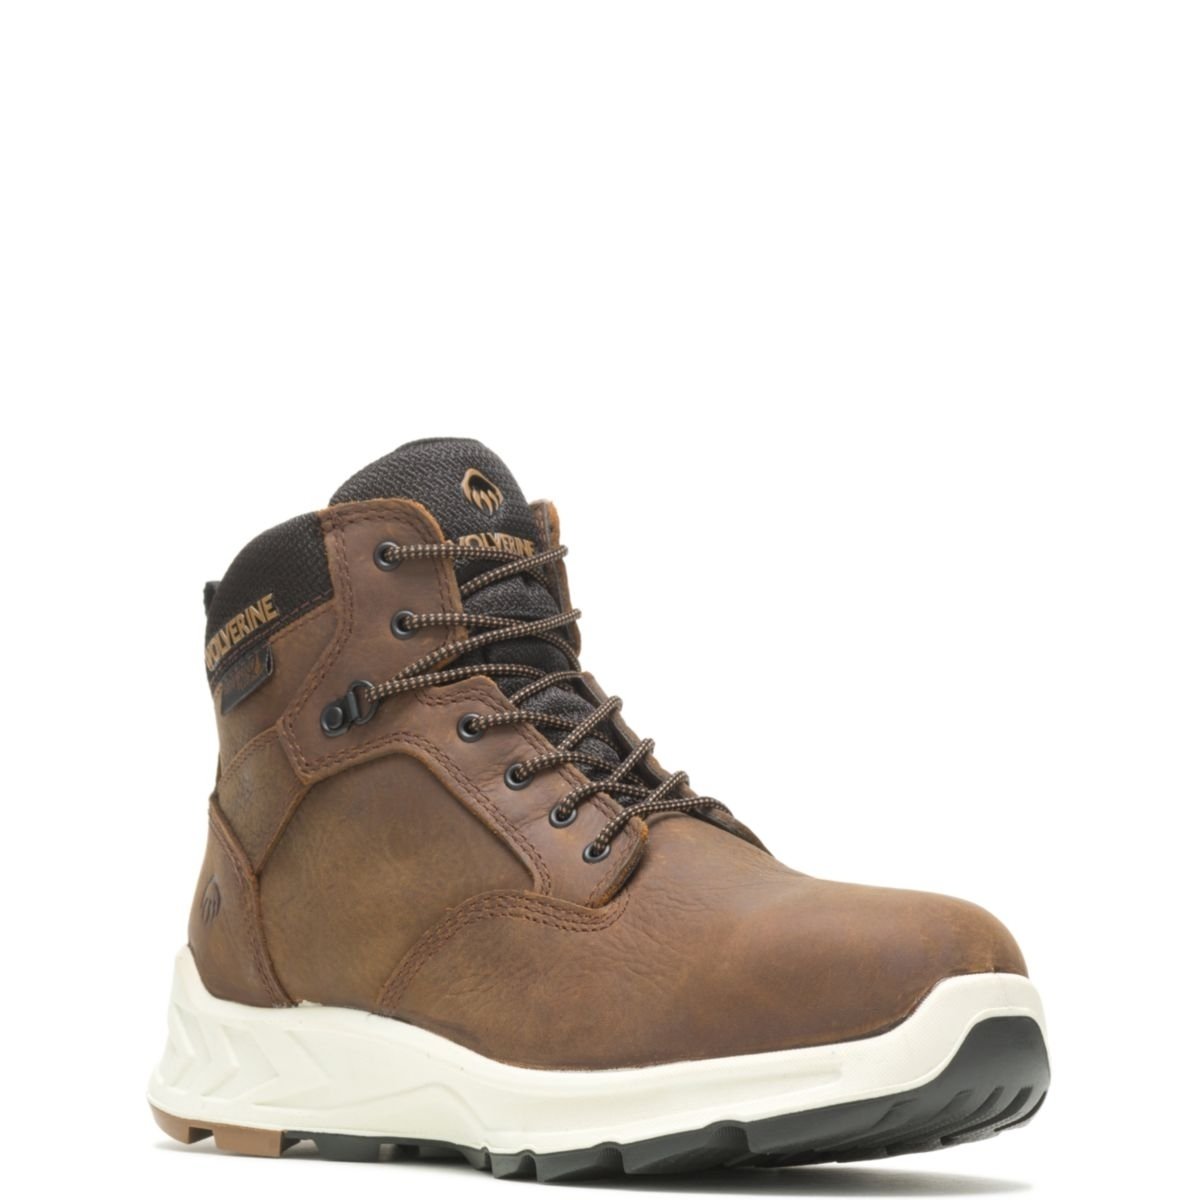 WOLVERINE Men's ShiftPlus Work LX 6 Alloy Toe Work Boot Brown - W201156 BROWN - BROWN, 10-M